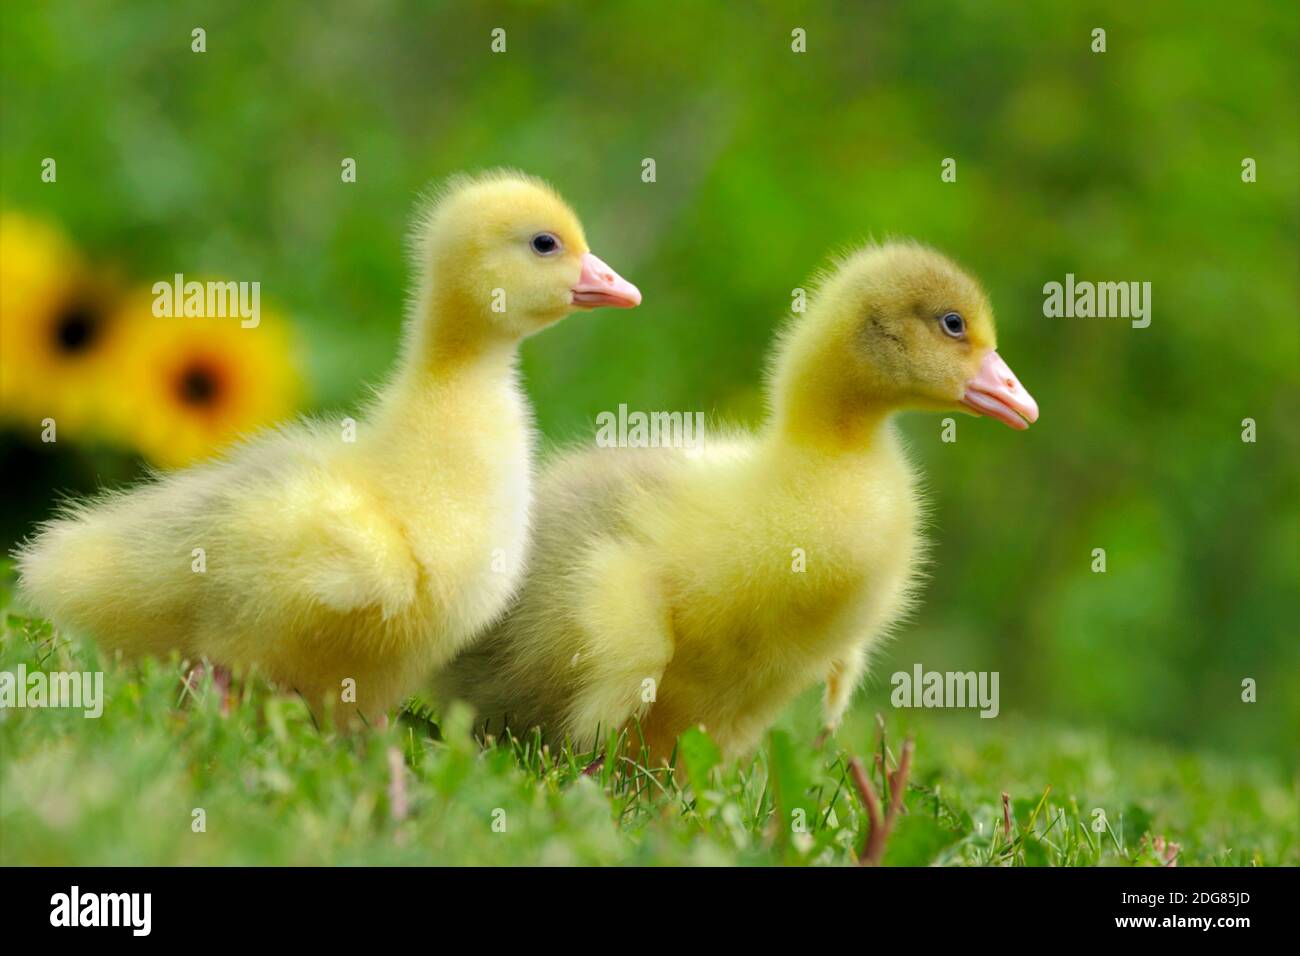 Emden Geese, two Gooseling, walking together in grass Stock Photo